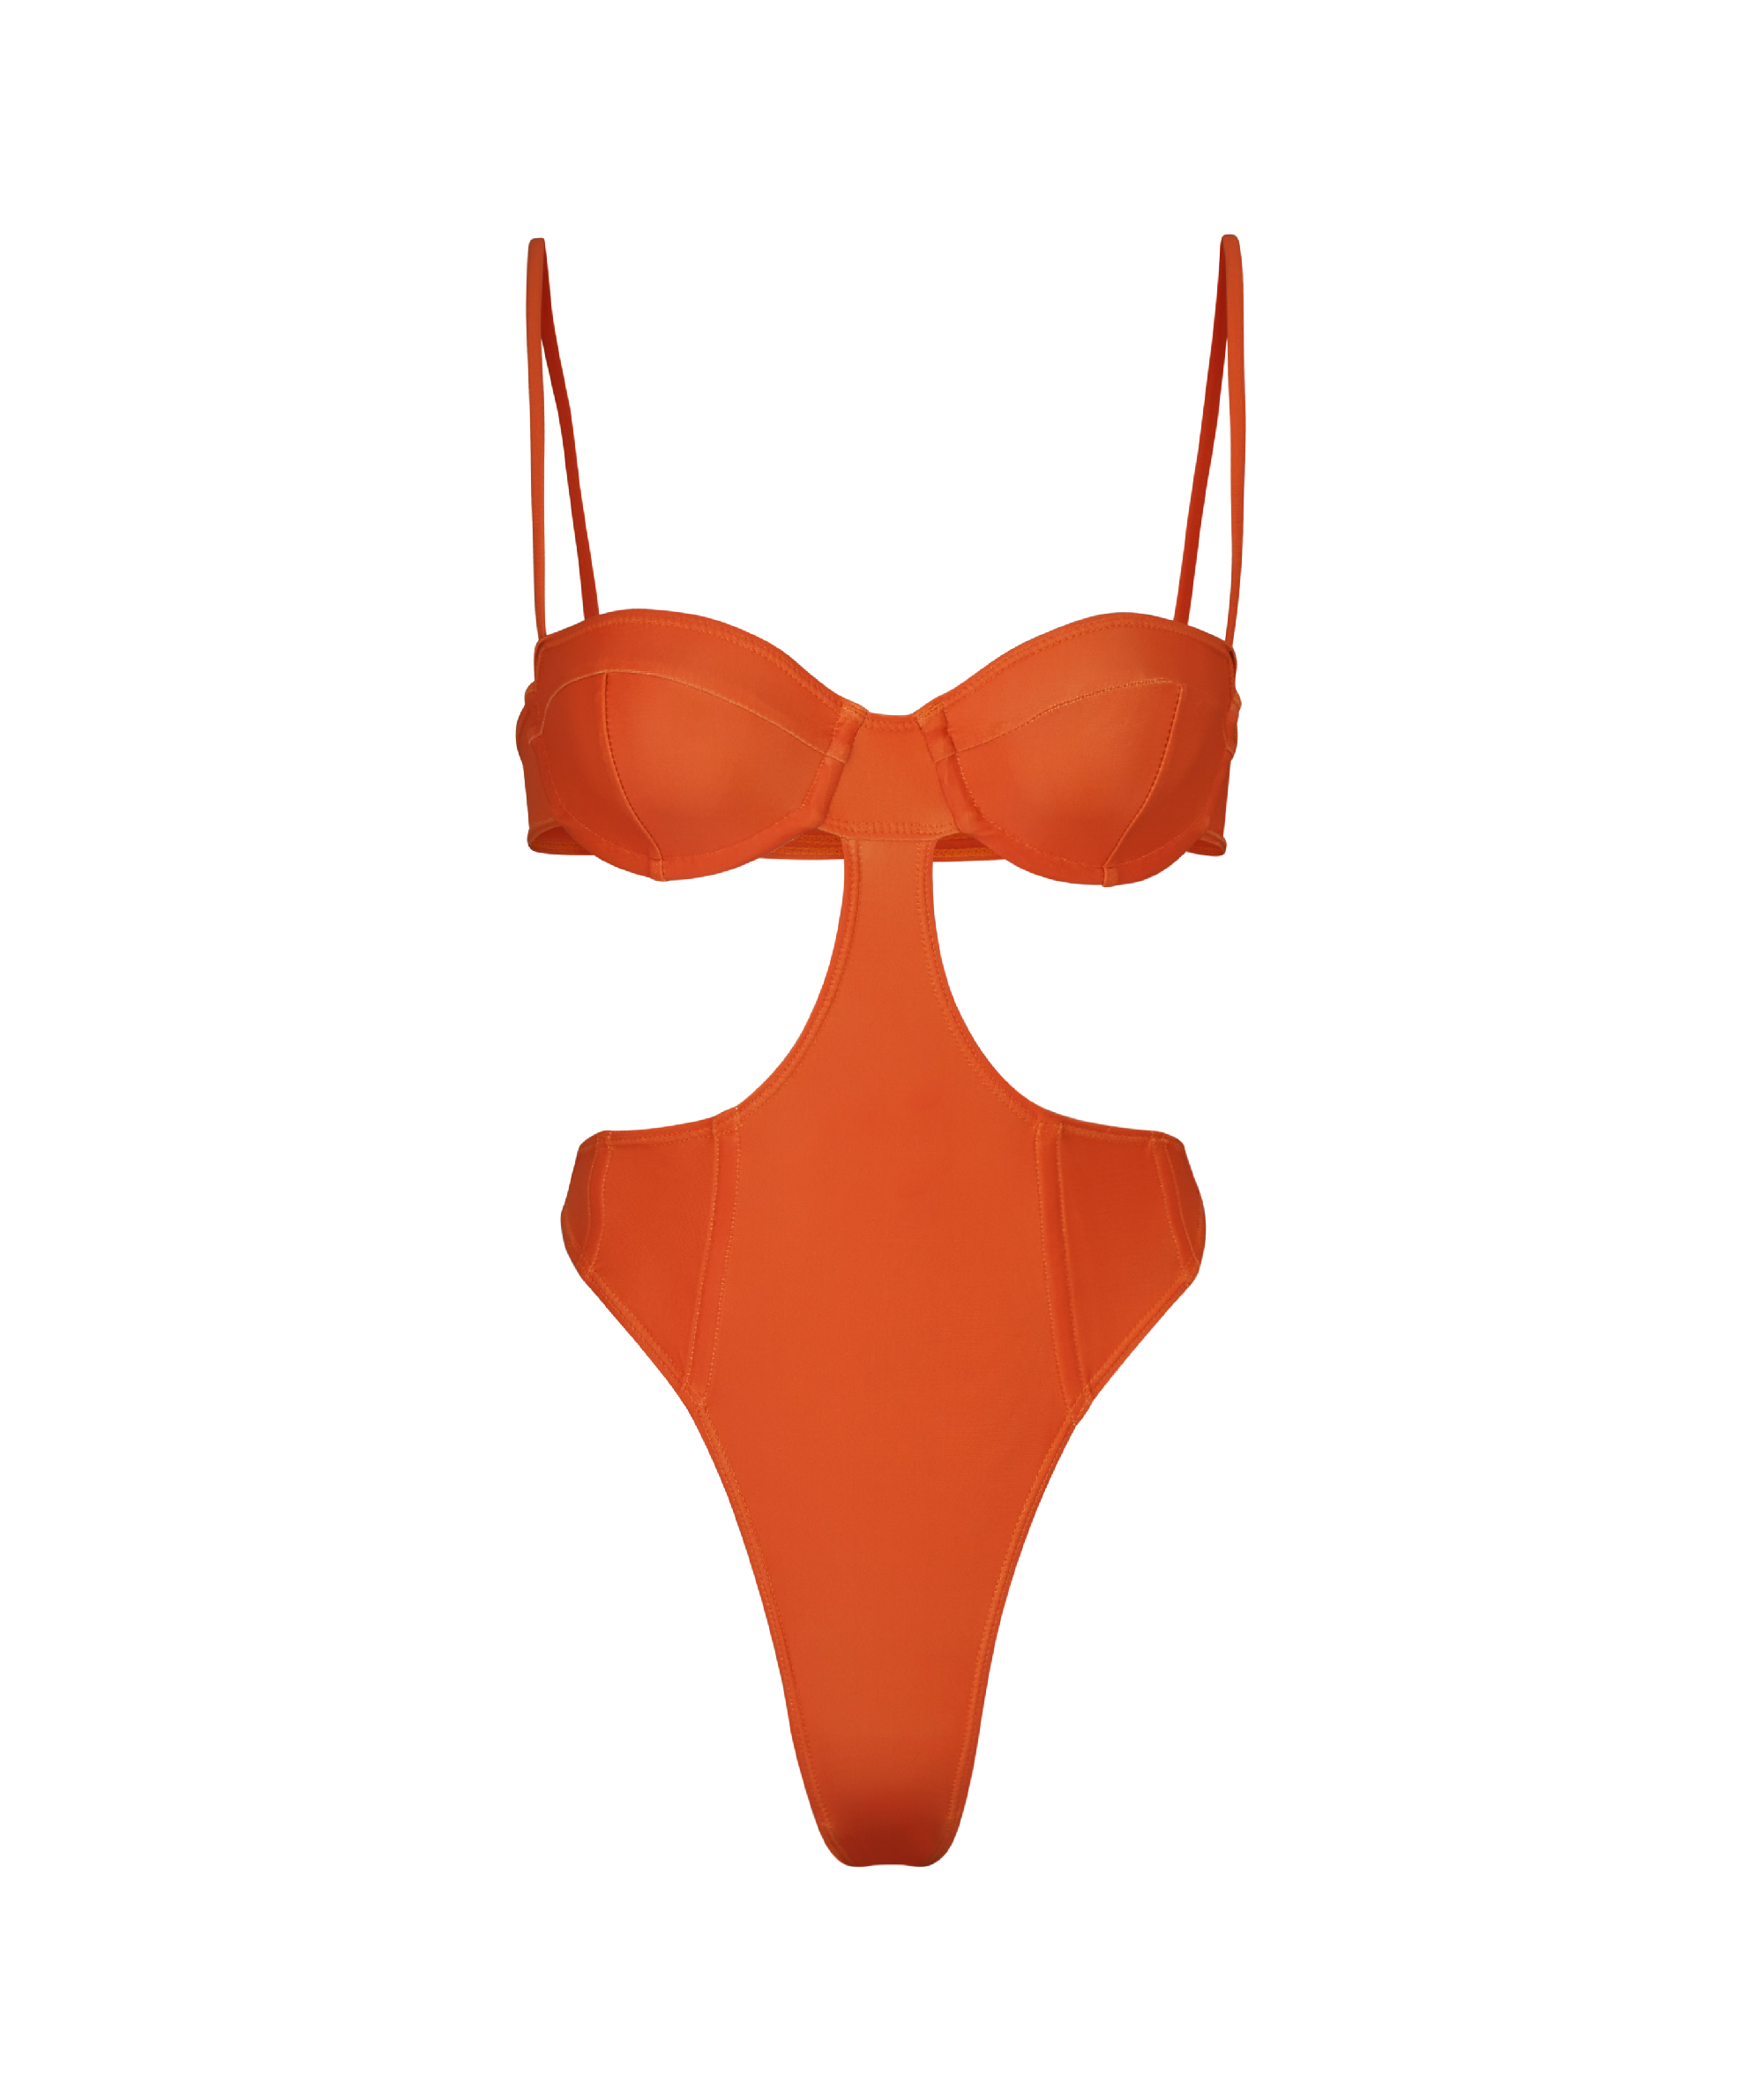 Kylie Swim Orange One-Piece Swimsuit with Over the Shoulder Adjustable Straps and Clasp Back uUnderwired Bra.